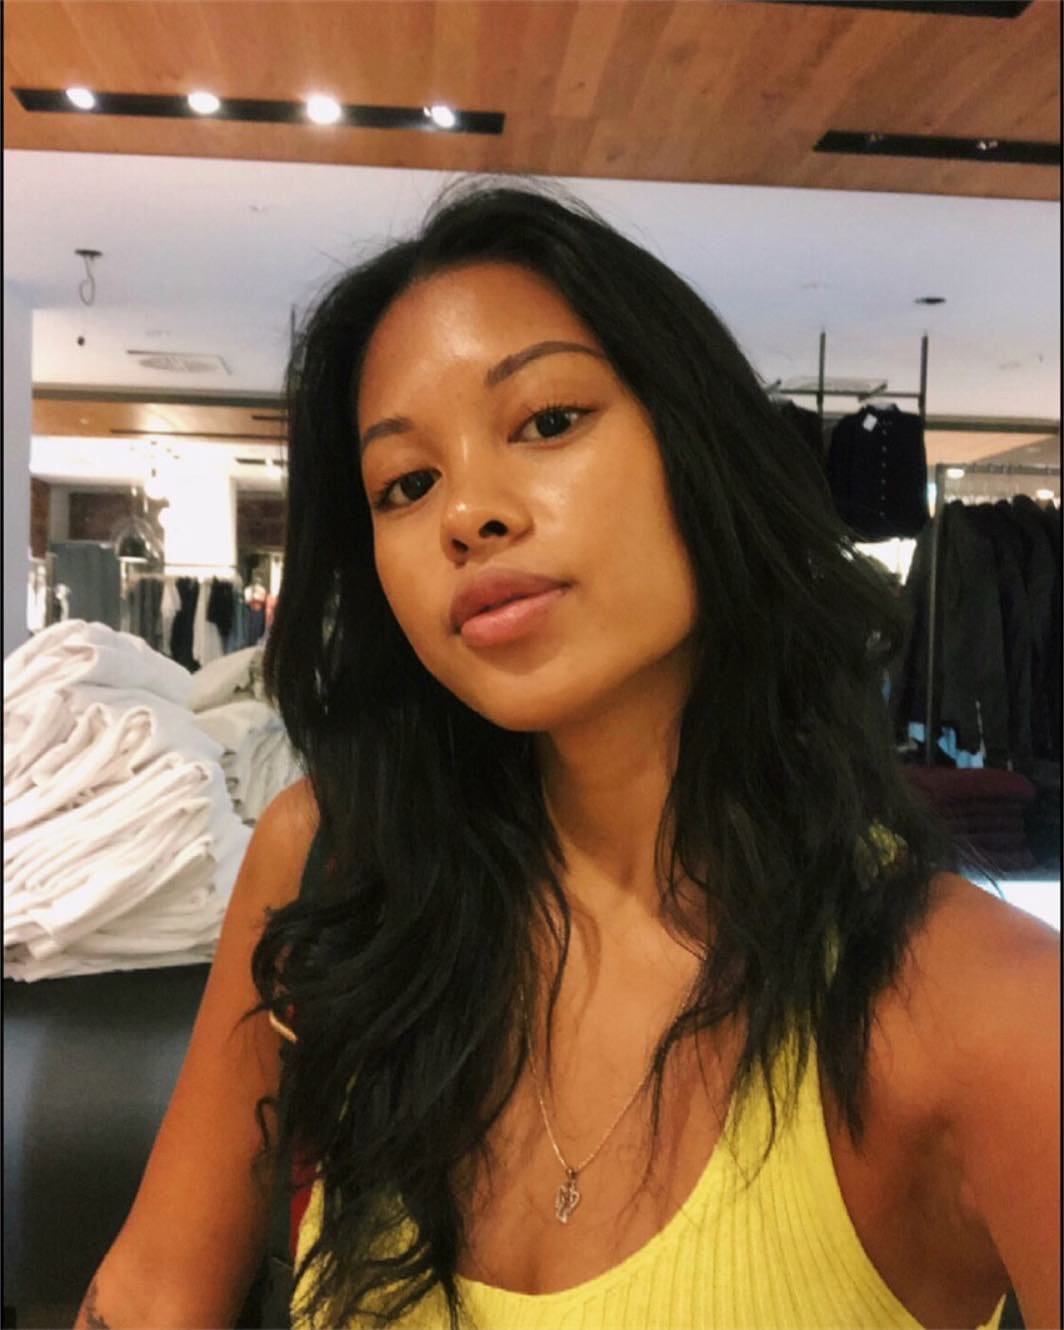 Chris Brown's Baby Mama, Ammika Harris Keeps Flaunting Her Snatched Body - Check Out Her Latest Jaw-Dropping Selfies